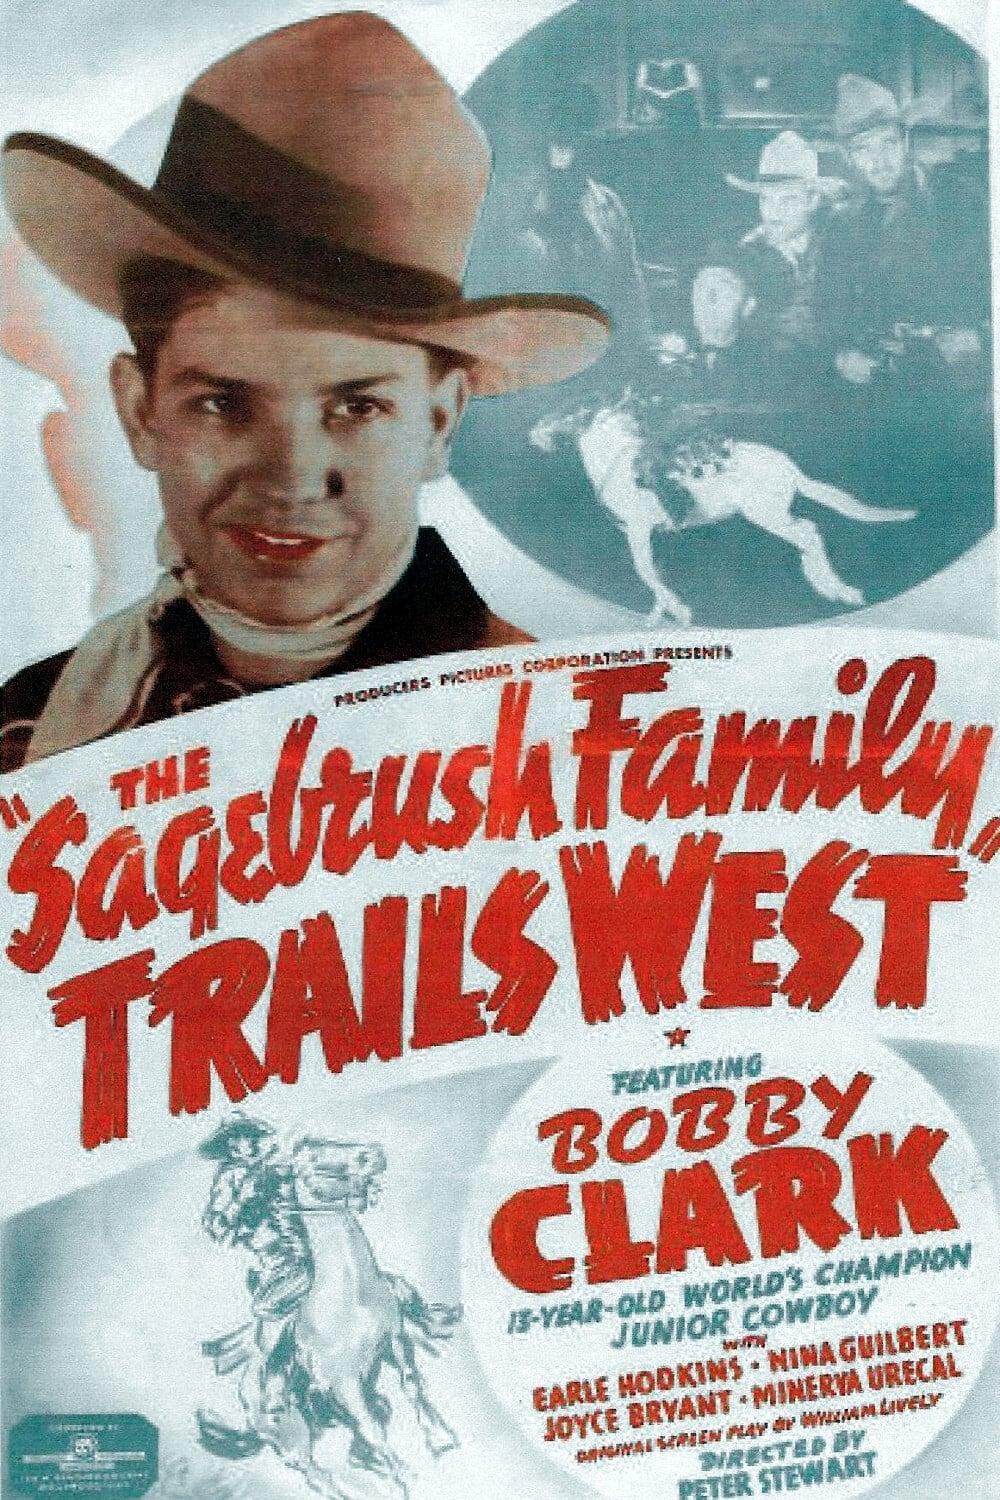 The Sagebrush Family Trails West poster